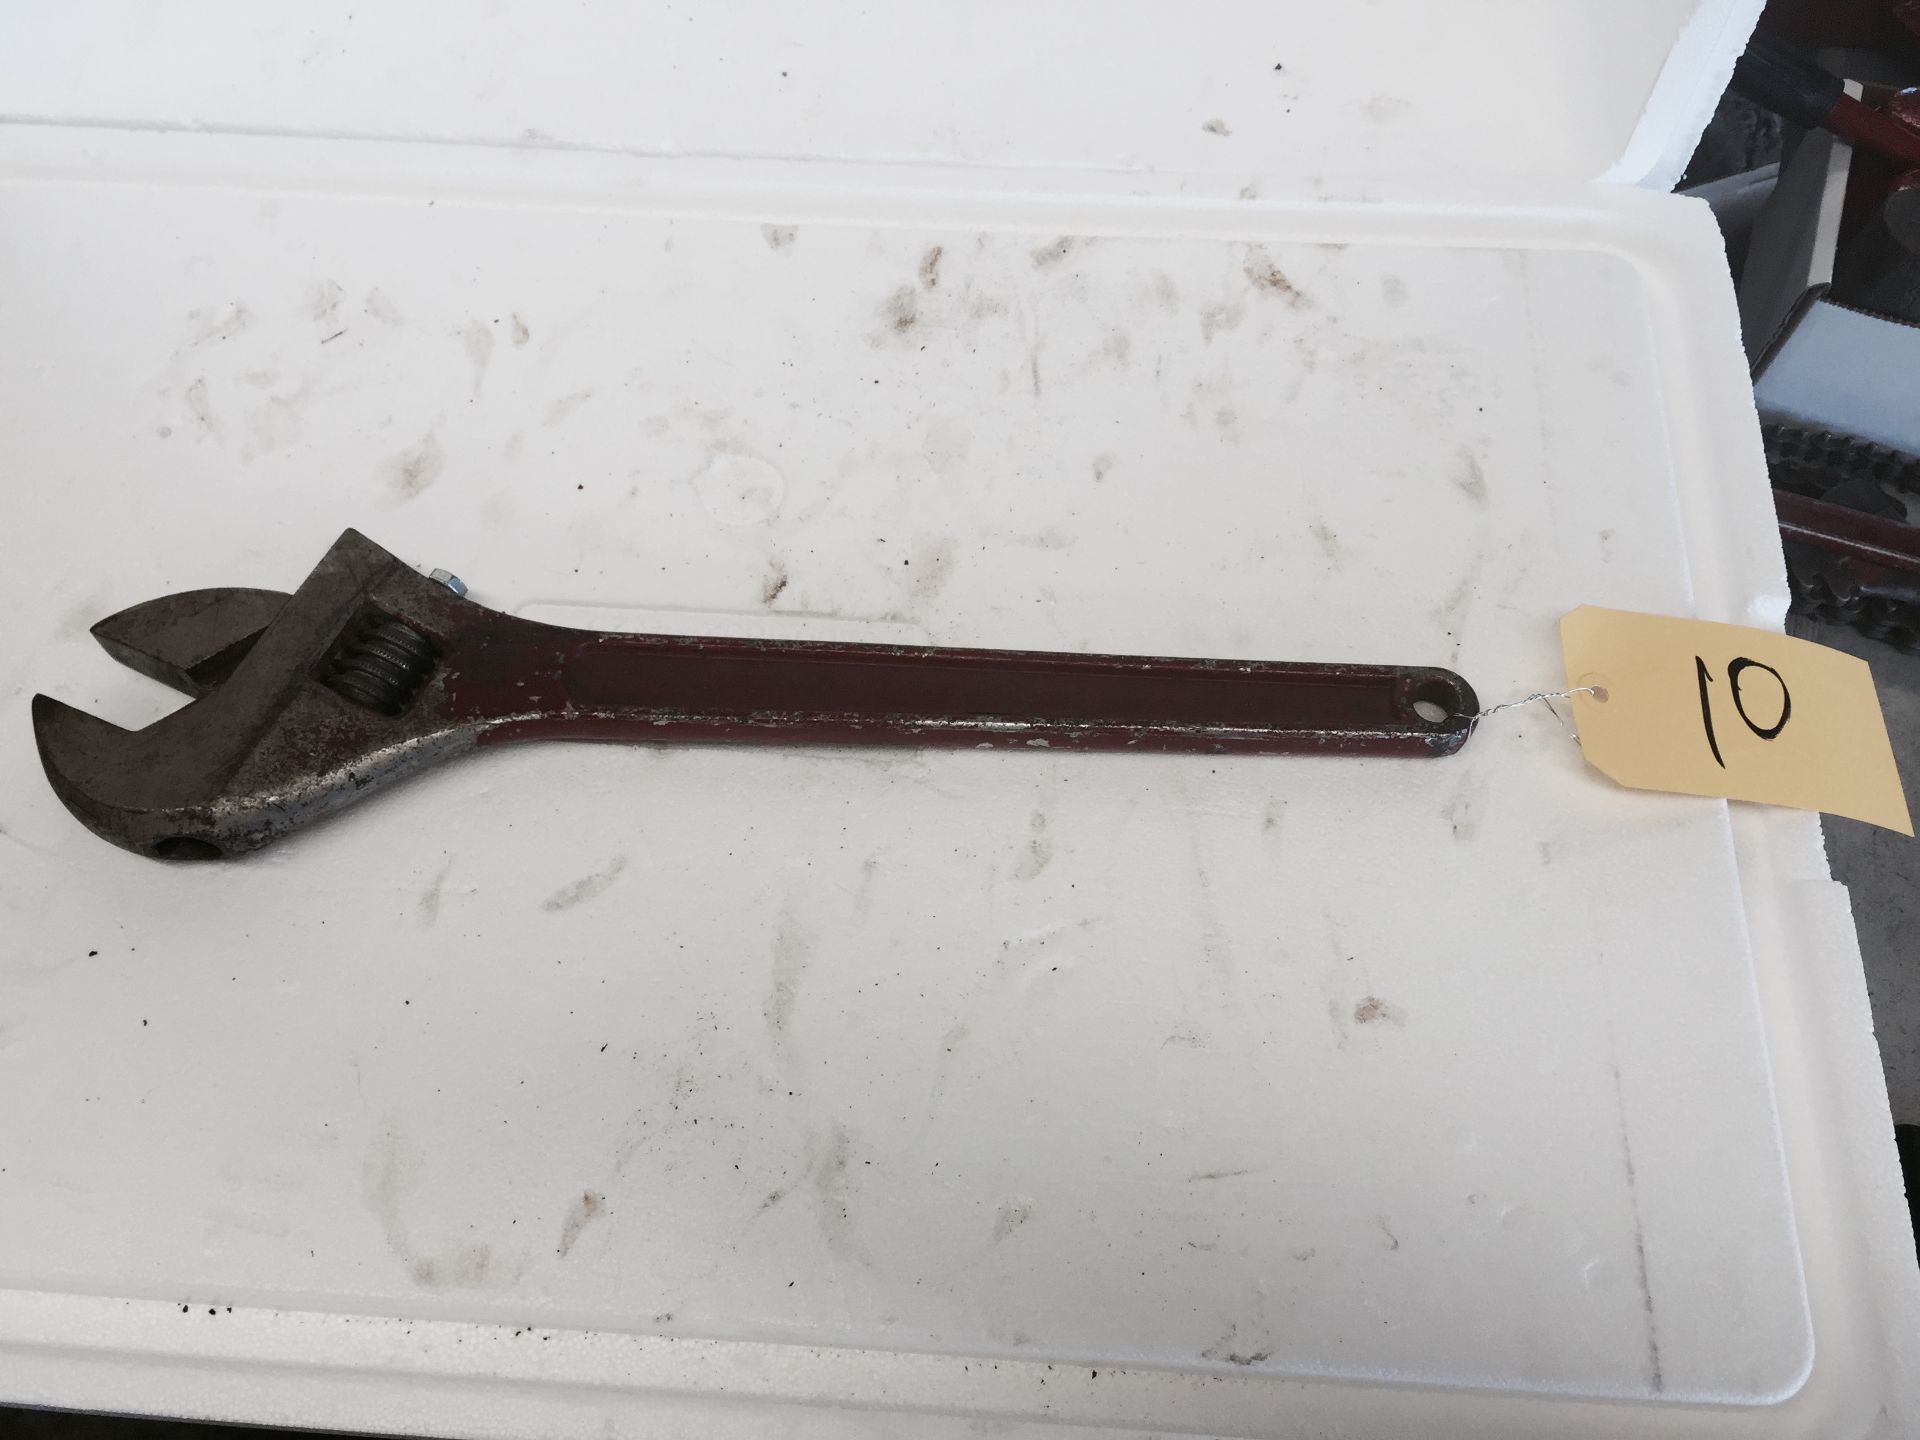 Wrench, adjustable